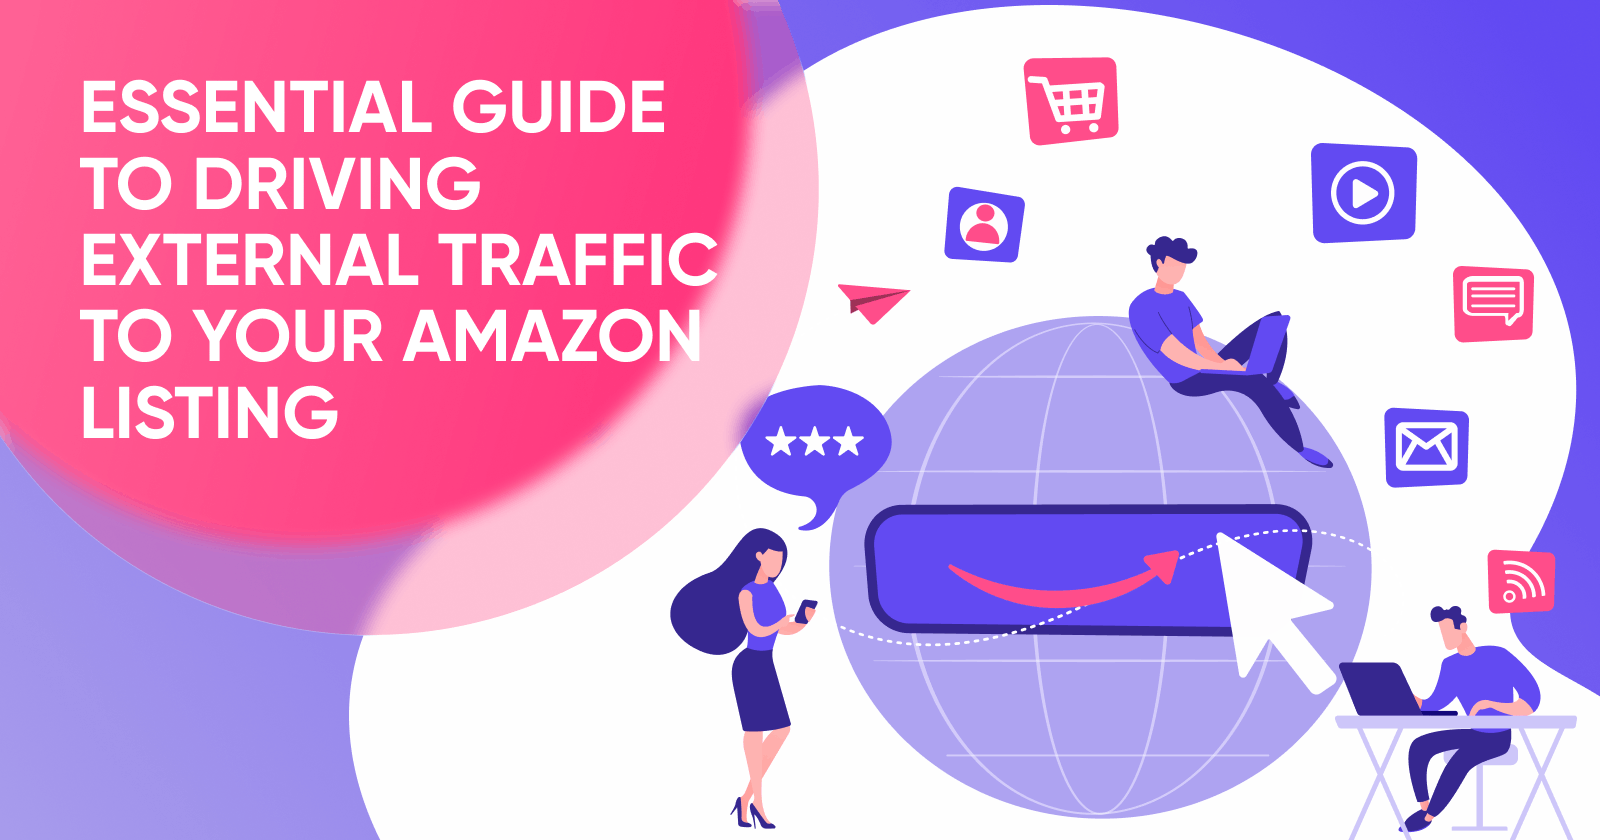 Driving External Traffic to Your Amazon Listing: An Essential Guide